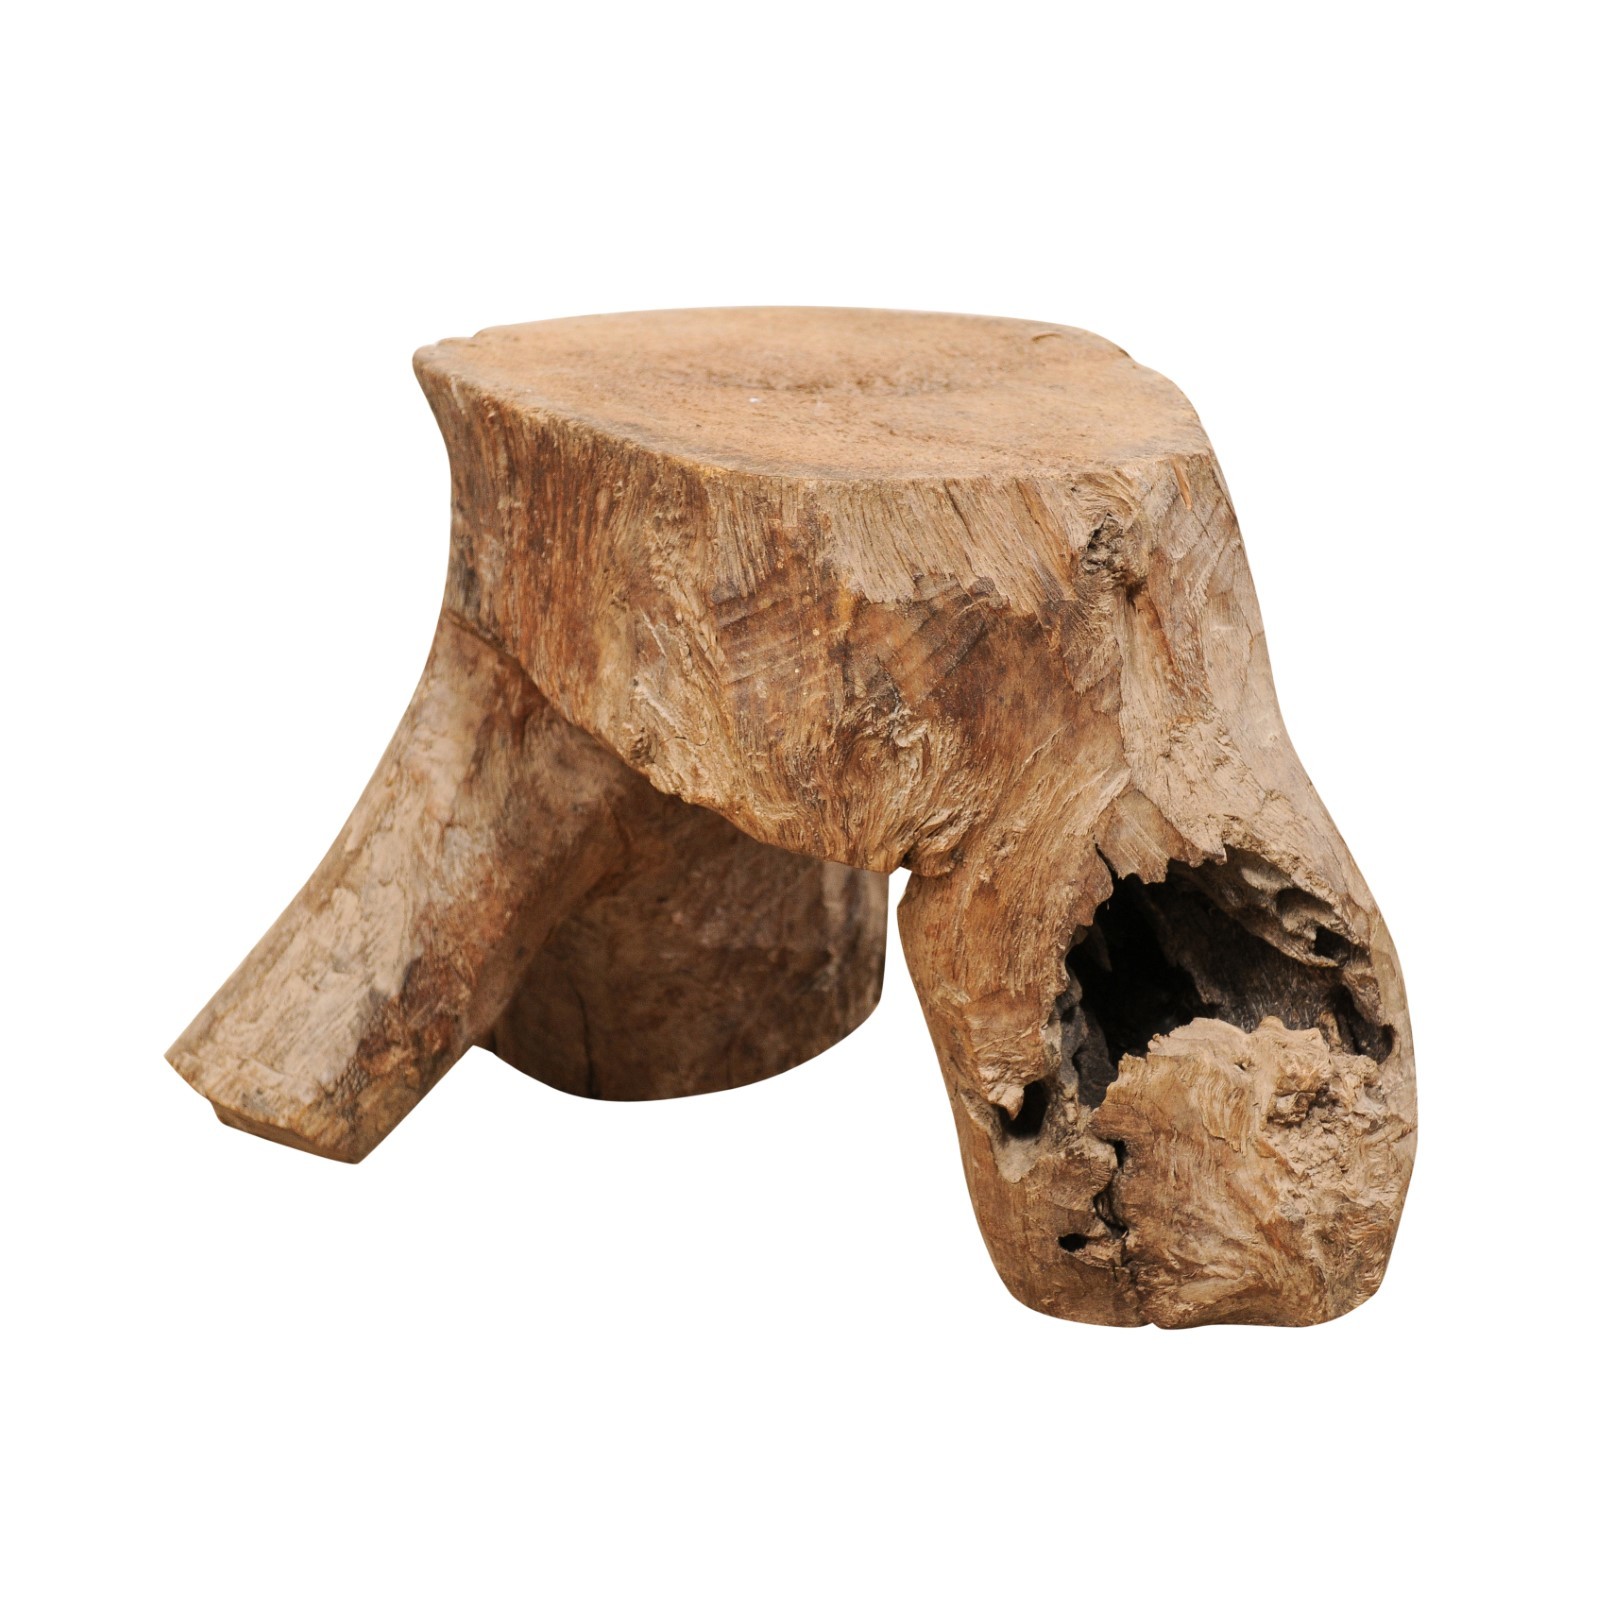 A Cute Wooden Stump Petite Drinks Table 